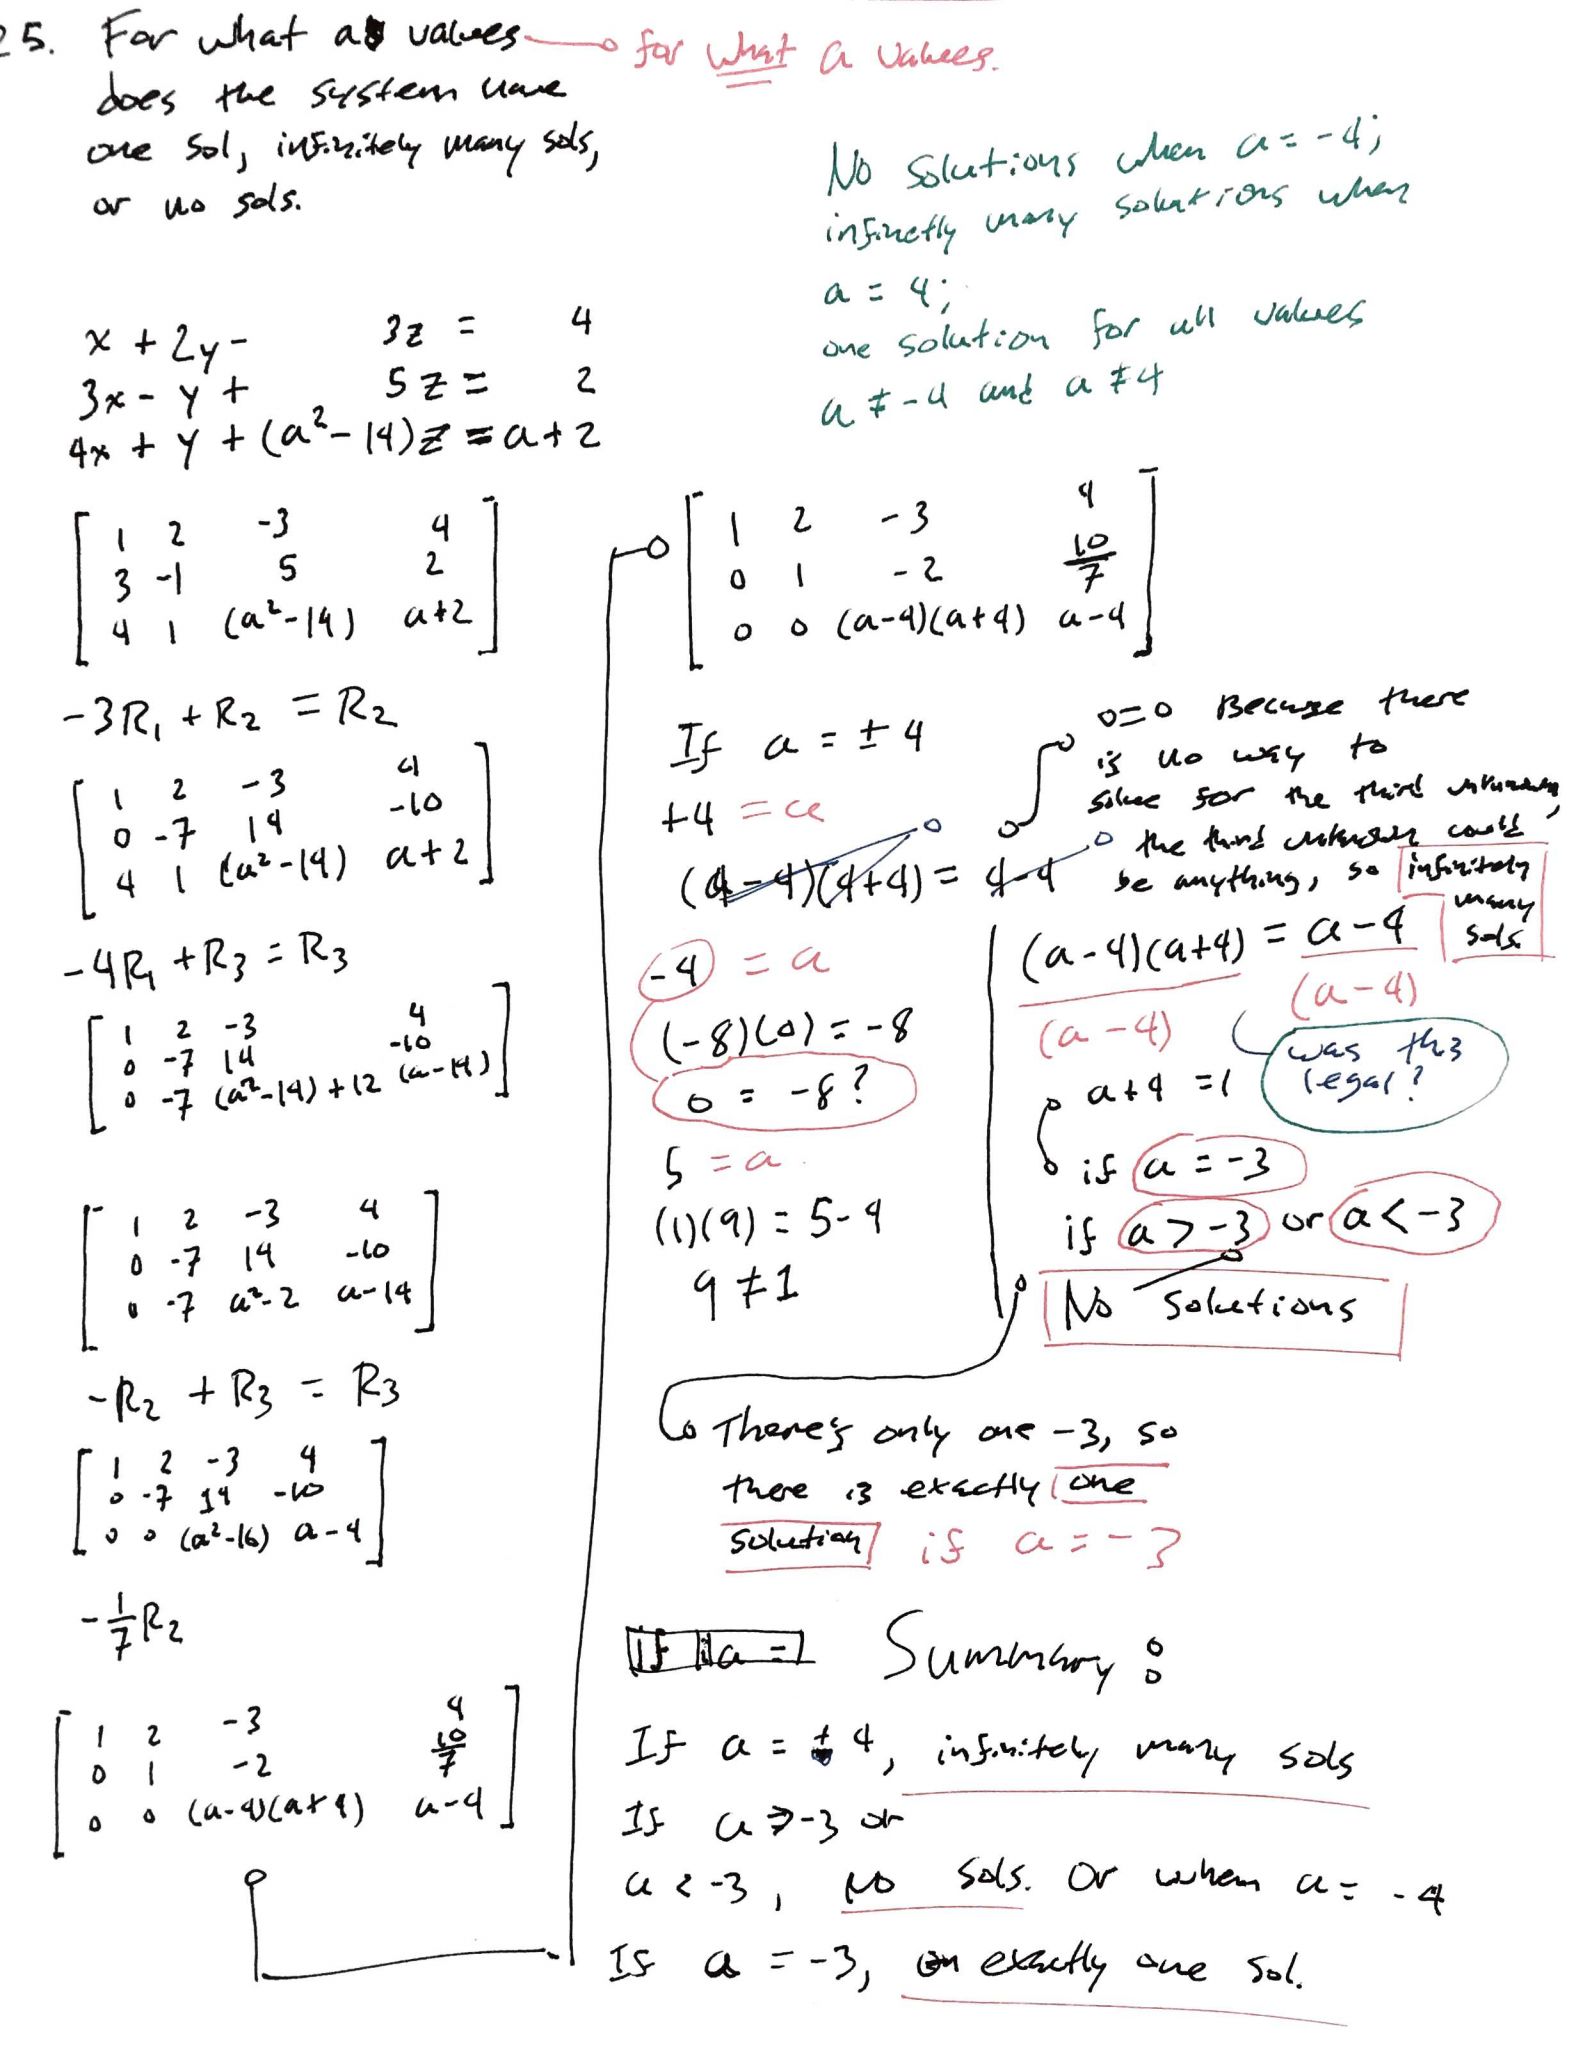 Writing Linear Equations Worksheet Answers as Well as Problem solving Linear Algebra